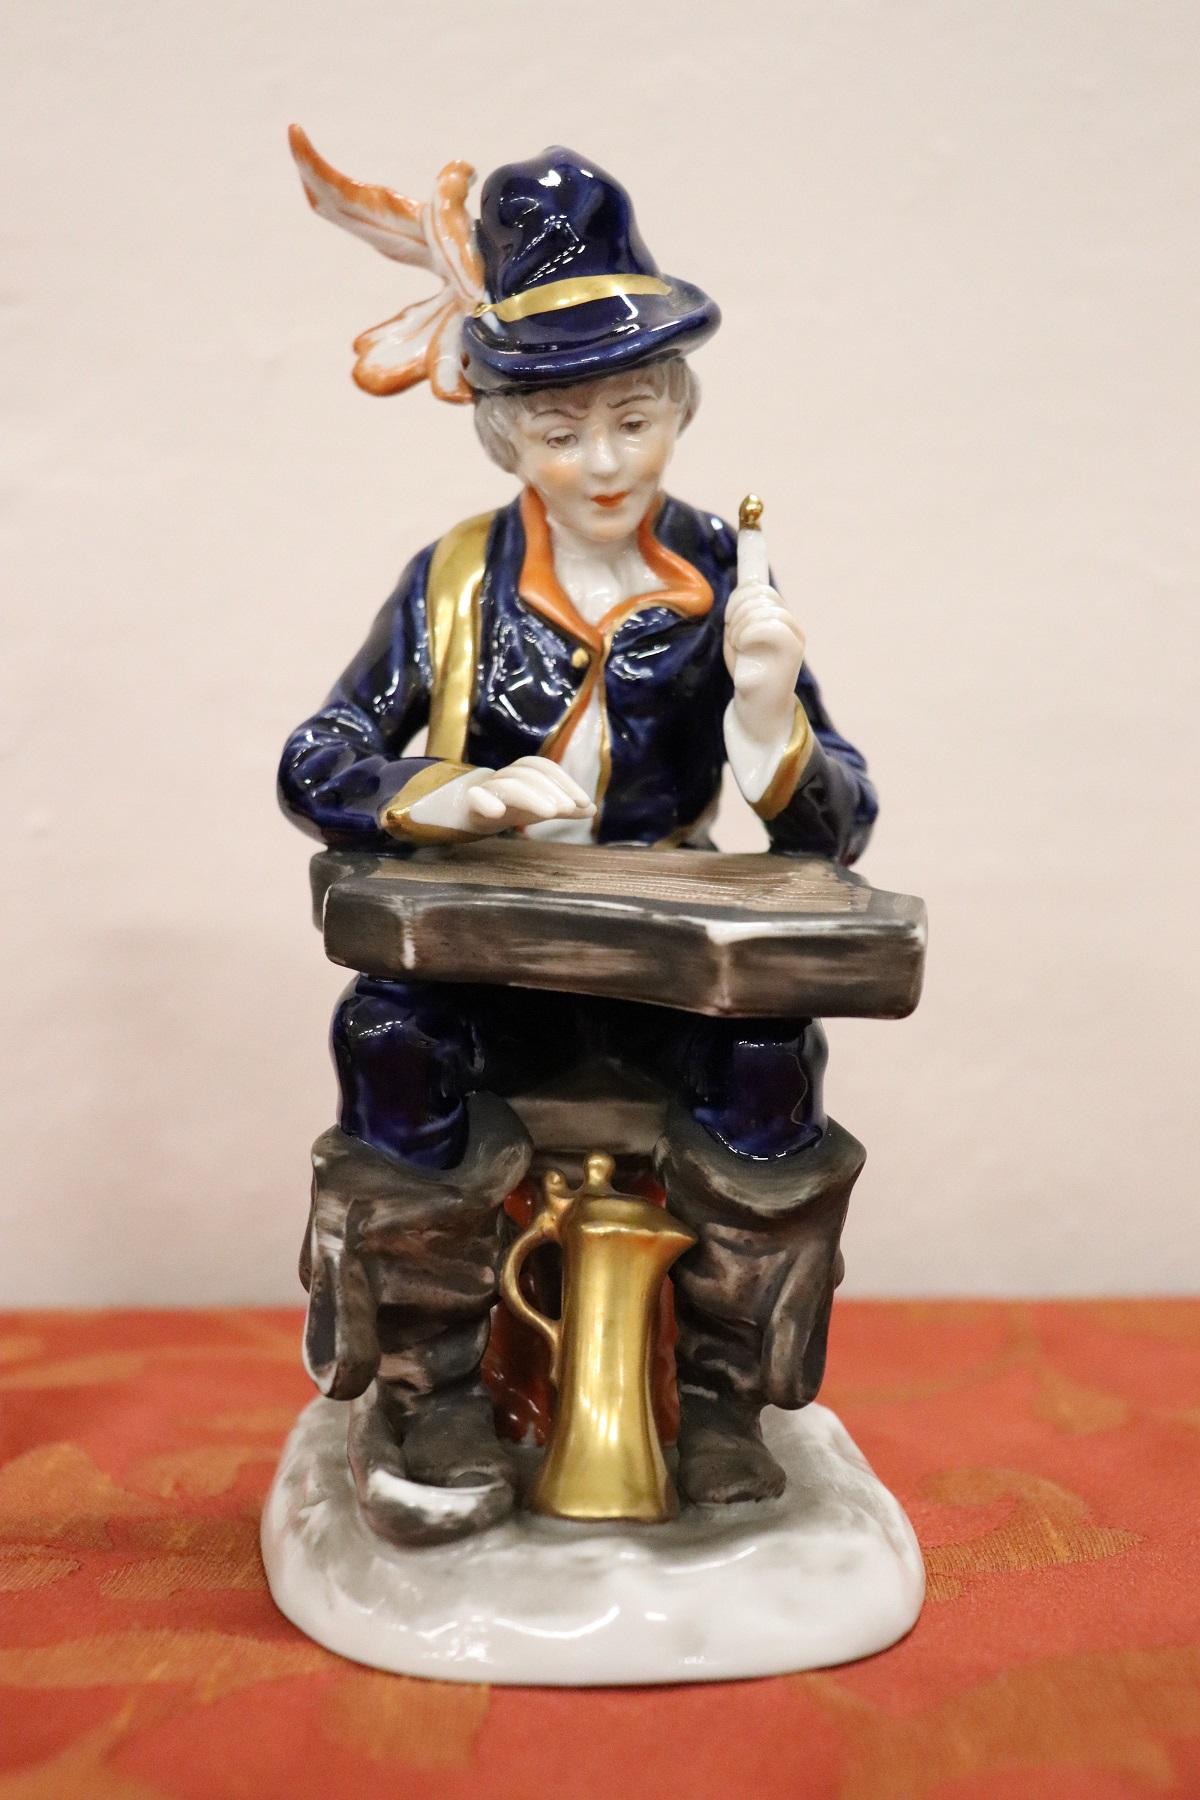 Refined hand painted sculpture in porcelain mark at the base. Two young players made with care in the details painted with clothes in shades of blue. Beautiful collectible porcelain.